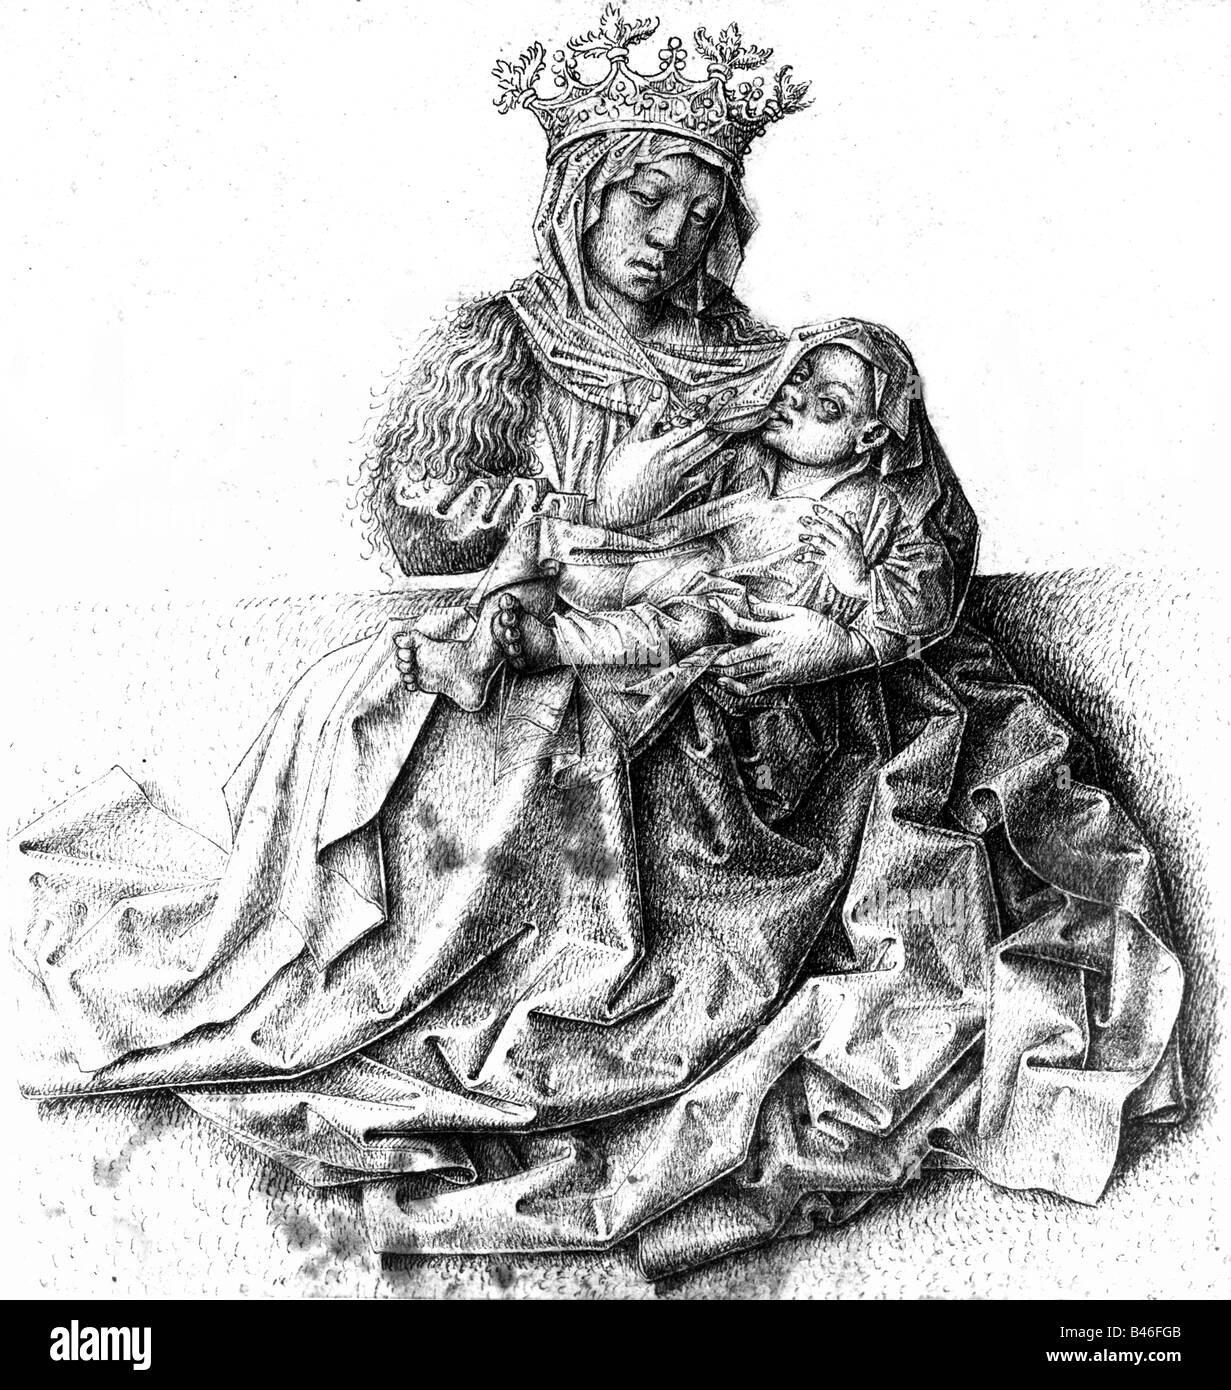 fine arts, religous art, Virgin Mary with child, graphic, 20.3 cm x 19.3 cm, Germany, 15th century, State Graphic Collection, Munich, Jesus Christ, mother of god, religion, Christianity, Christendom, crown, cloak, Middle Ages, graphics, print, prints, historic, historical, people, medieval, Stock Photo